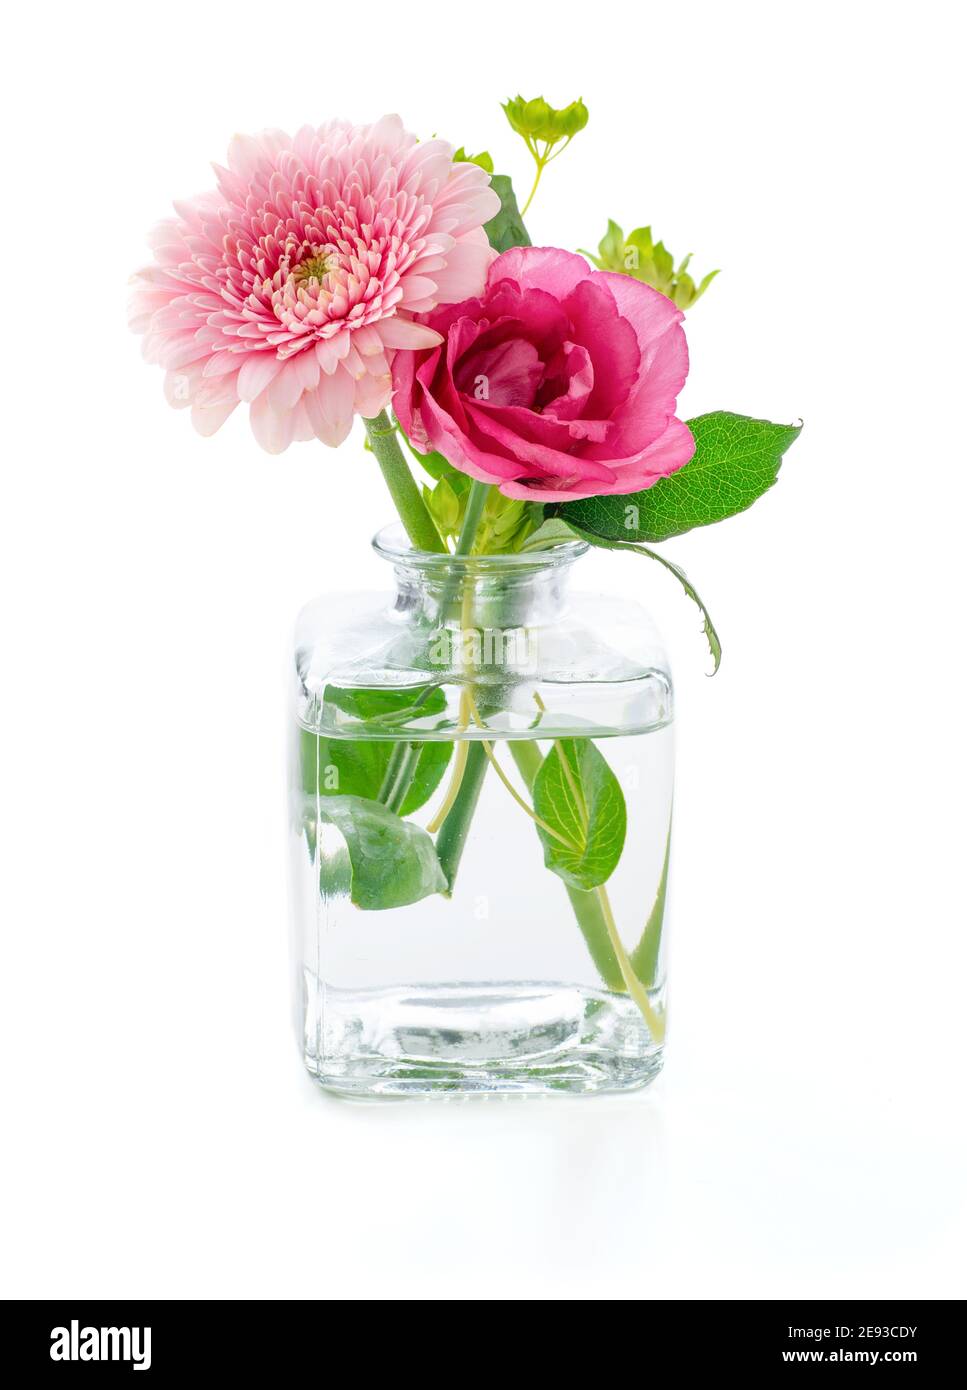 Flowers in a glass vase on a white background Stock Photo